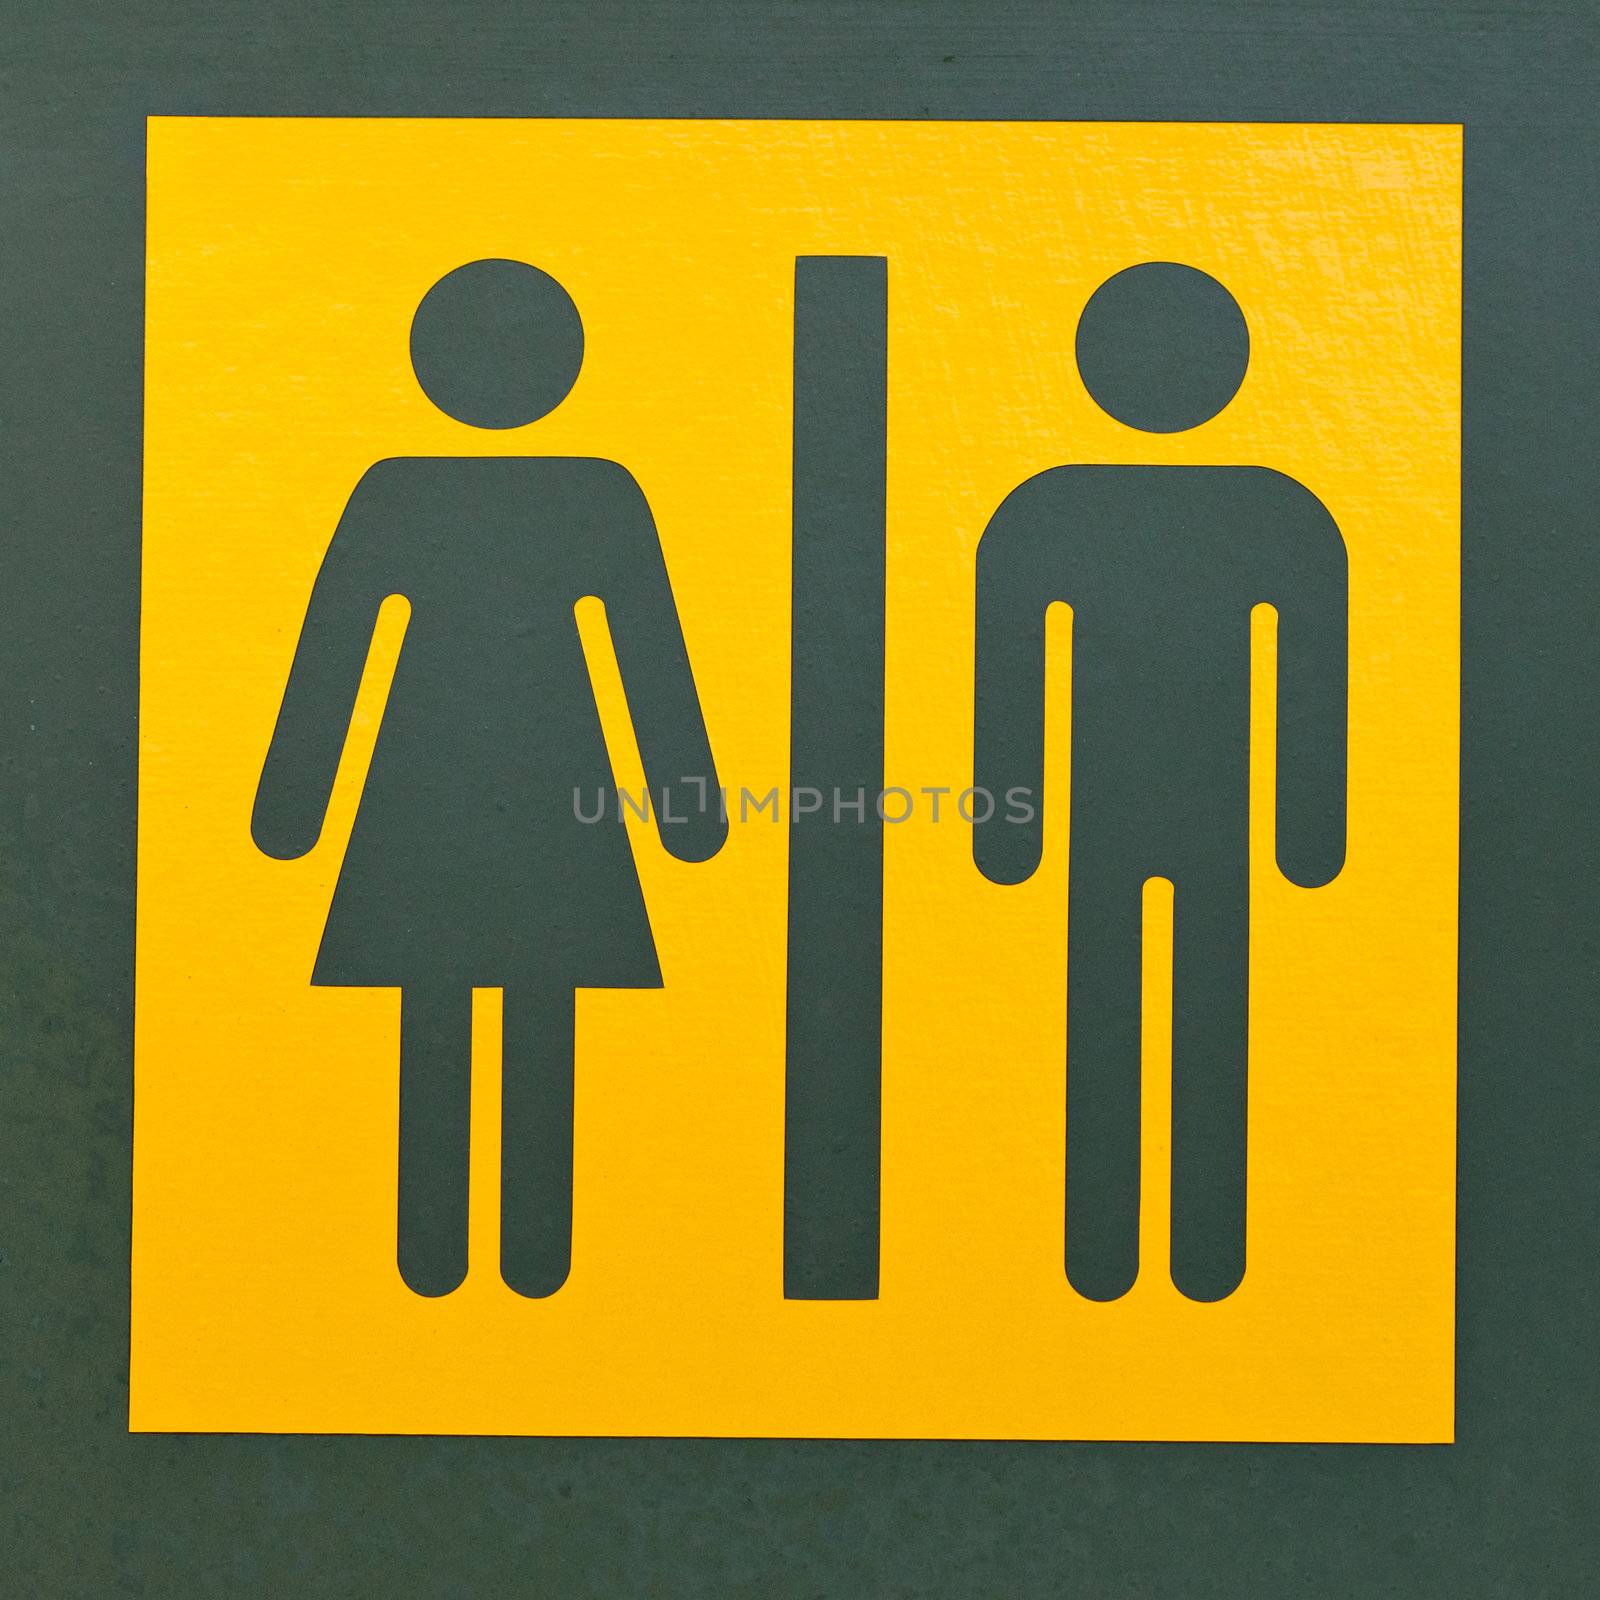 Signpost for men and women or male and female as often used to indicate restrooms with two silhouetted figures standing side by side on yellow